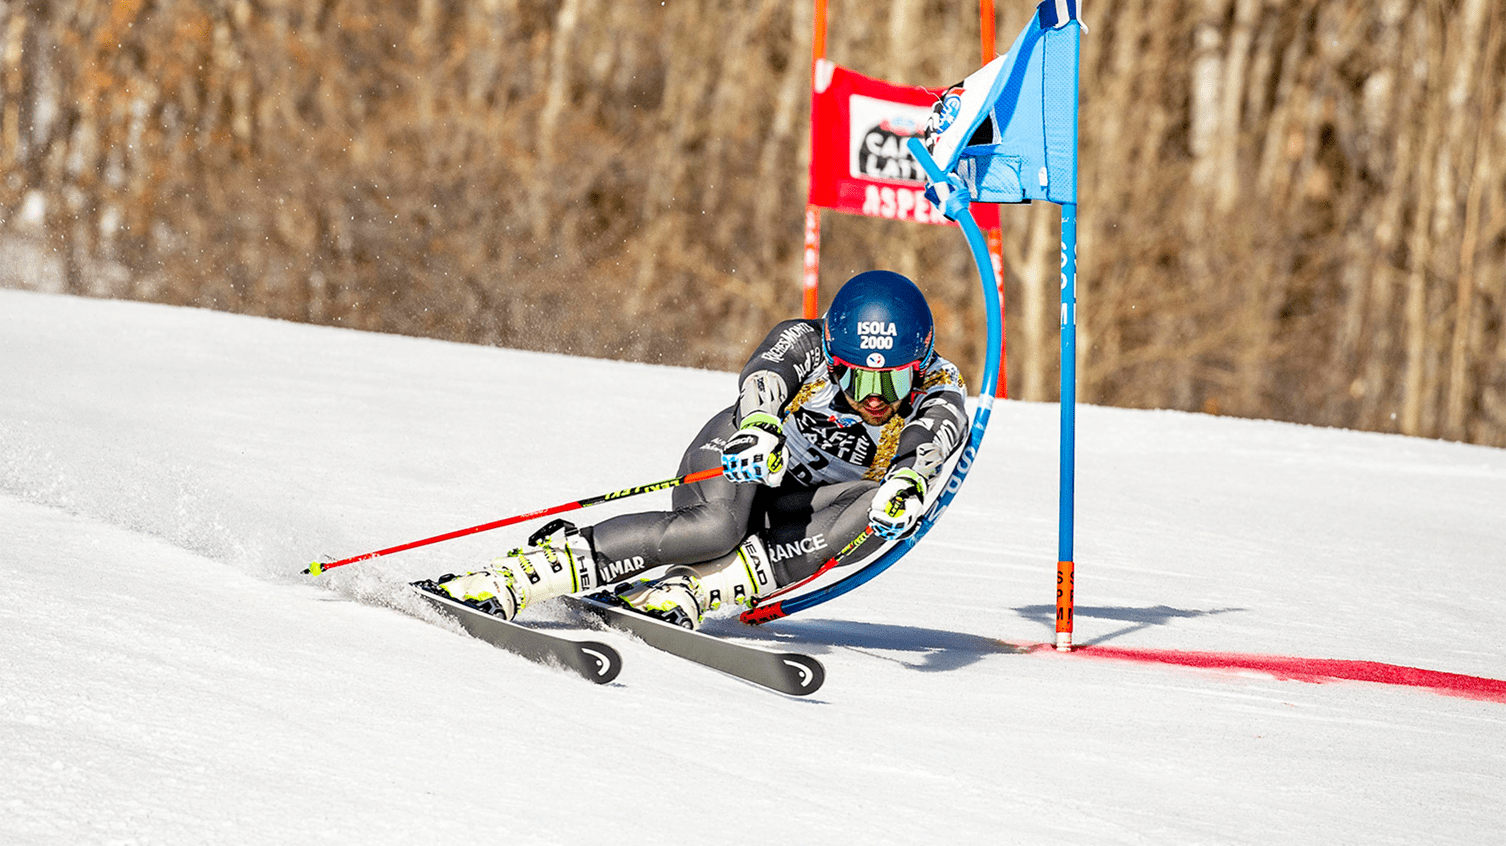 Downhill race at Aspen World Cup